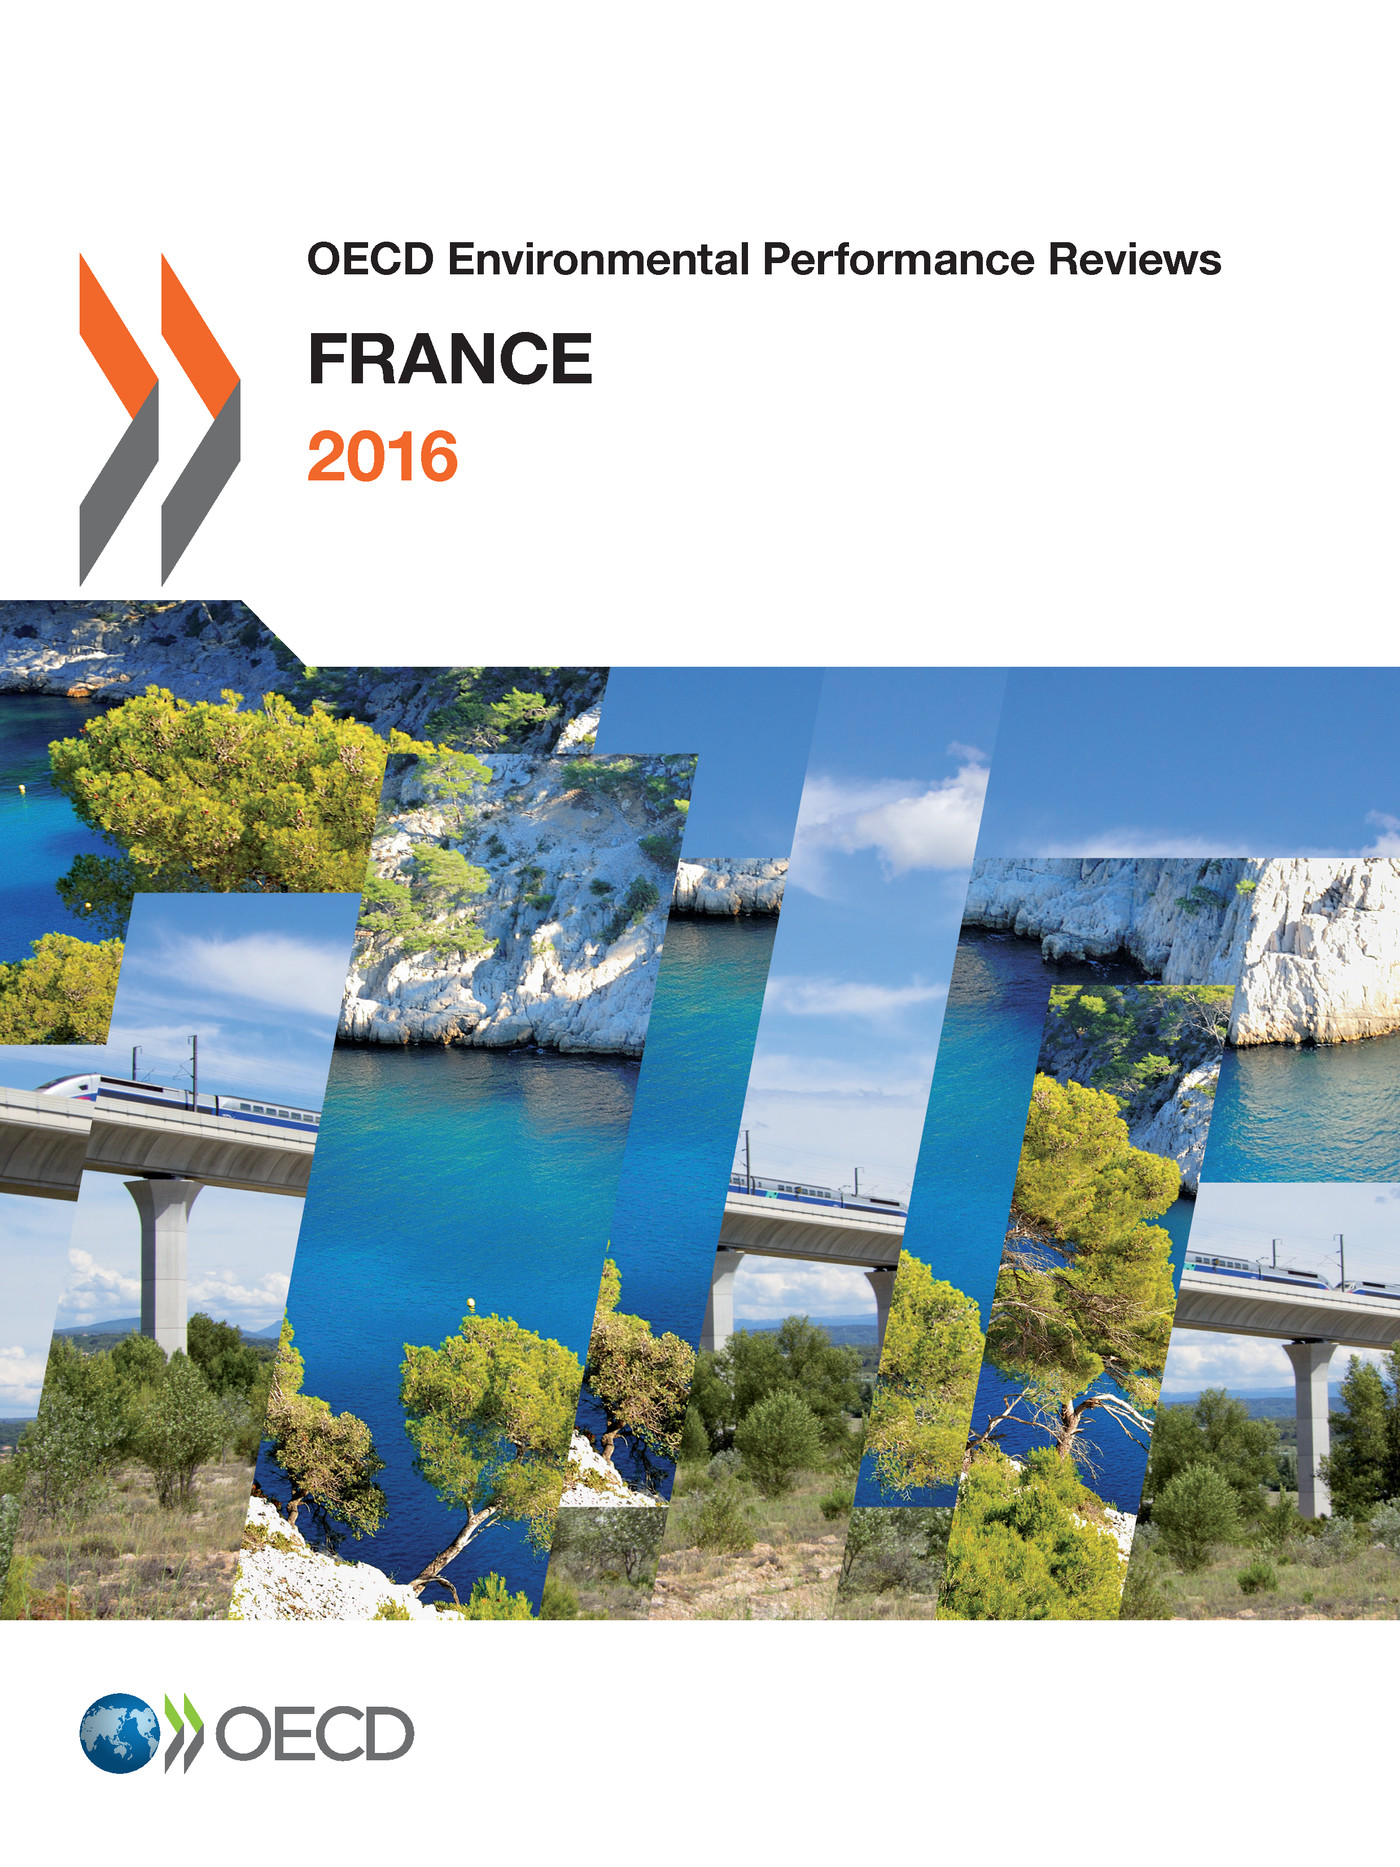 OECD Environmental Performance Reviews: France 2016 -  Collectif - OCDE / OECD